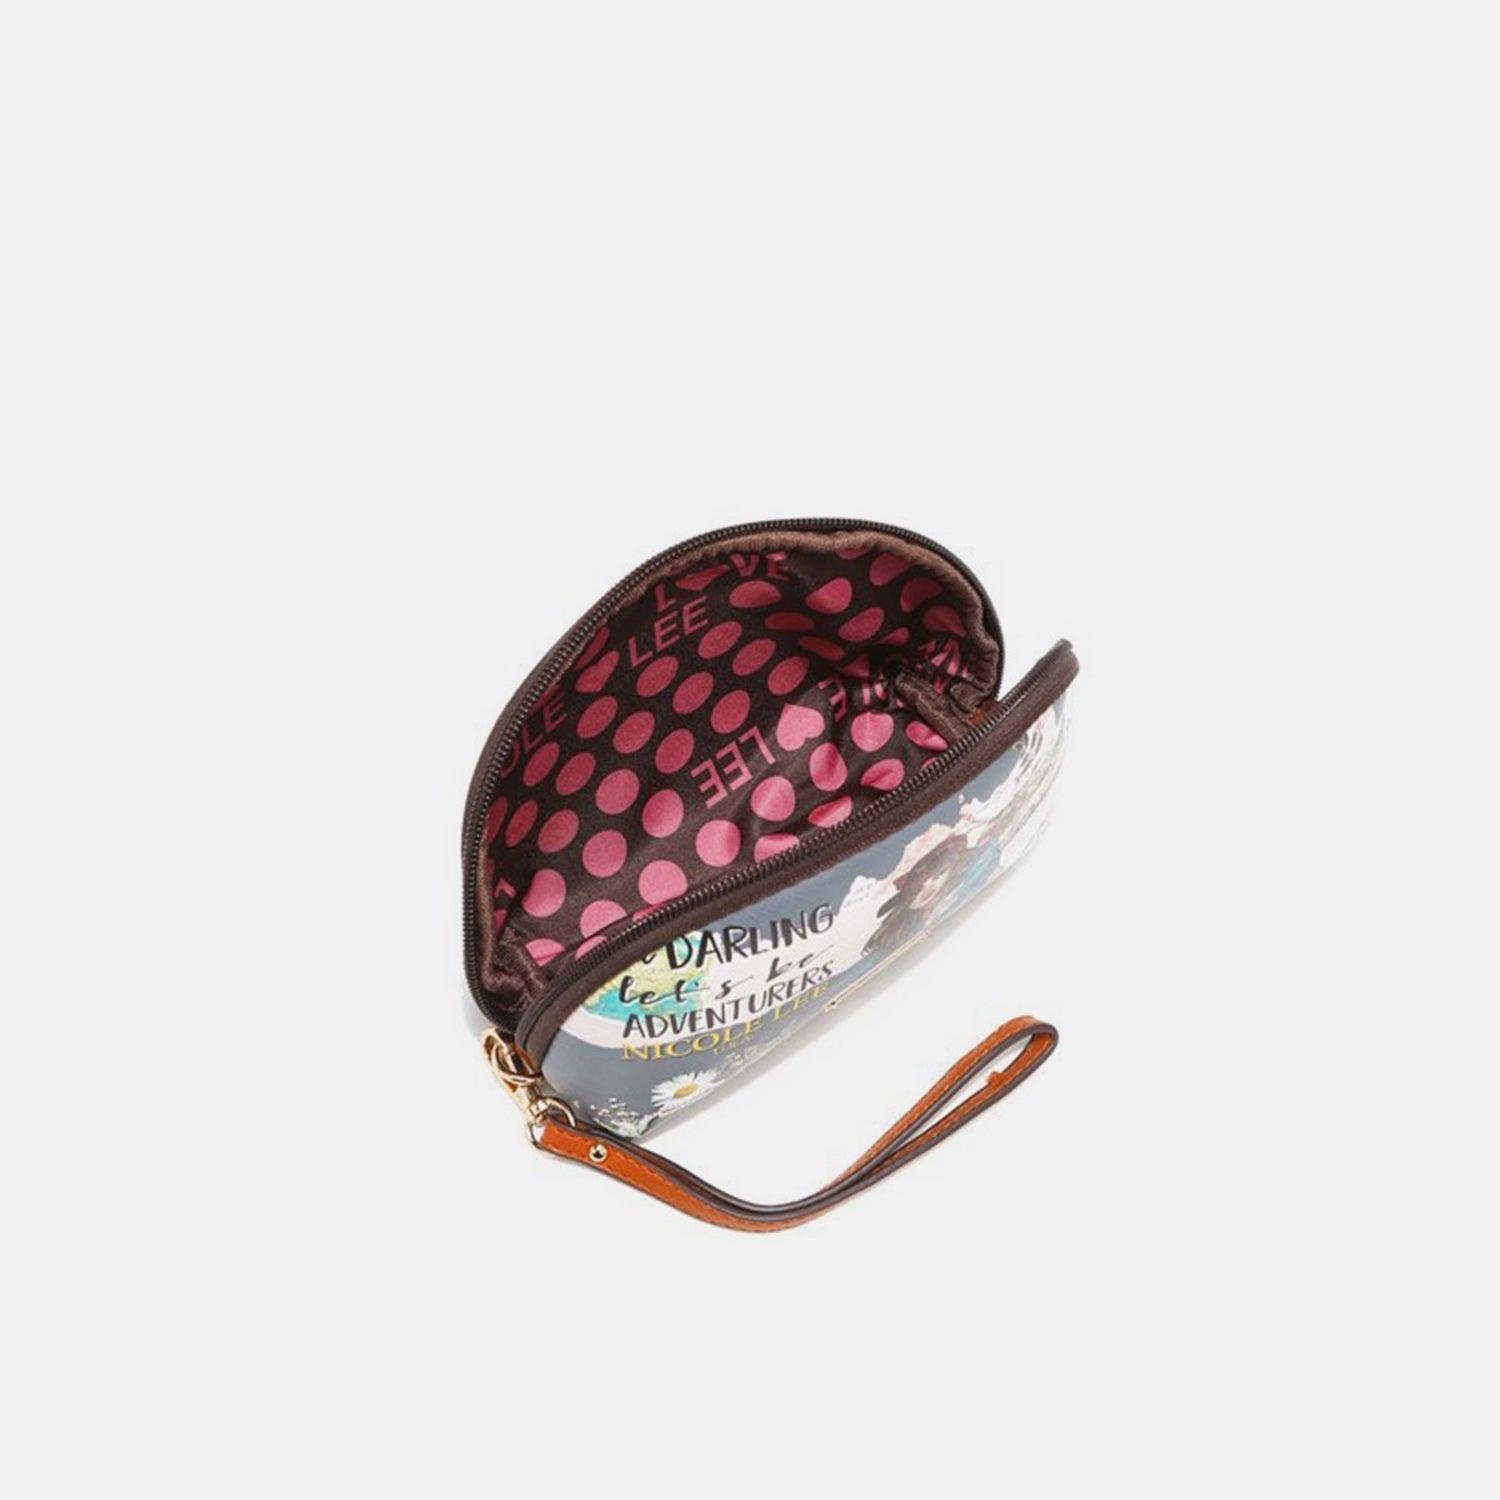 a small purse with a polka dot pattern